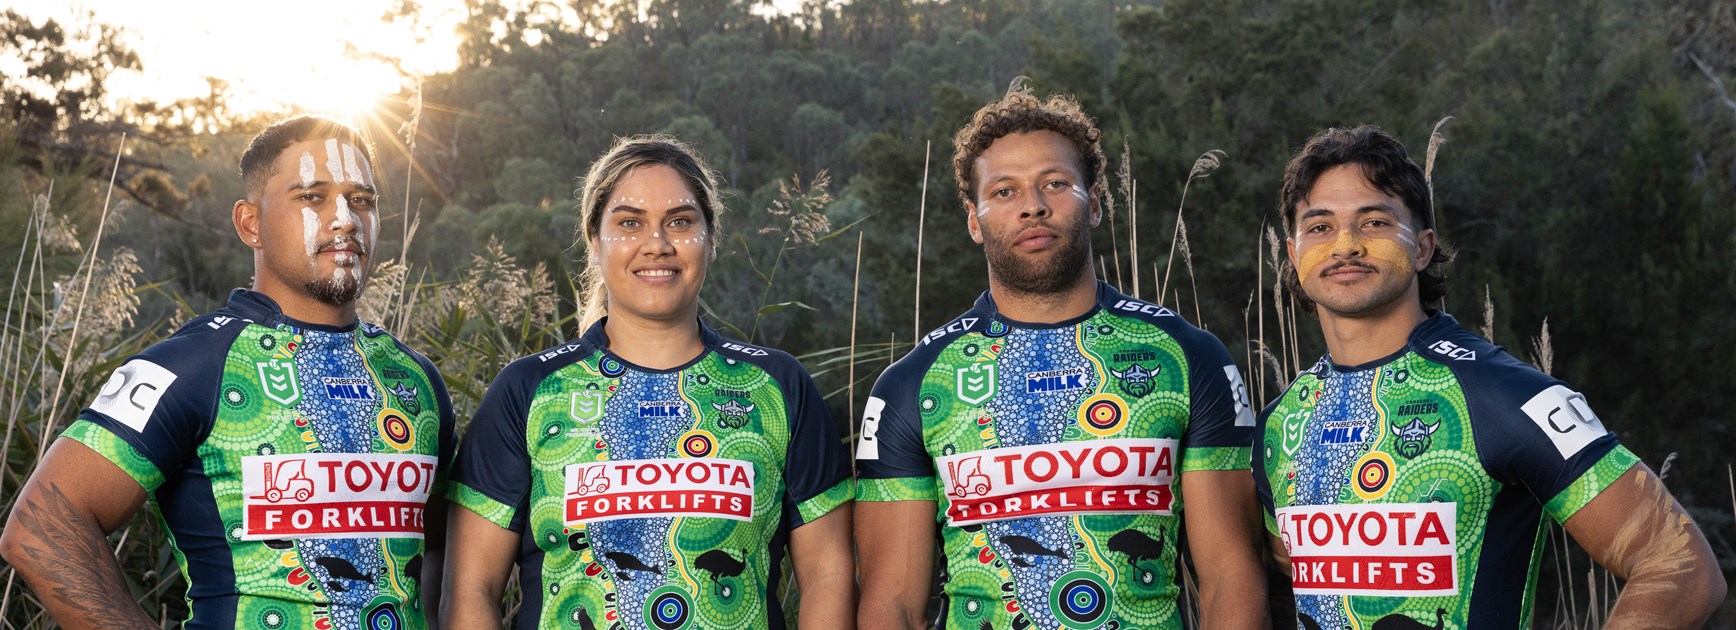 Raiders Match Worn Indigenous jersey sale to support Hands Across Canberra